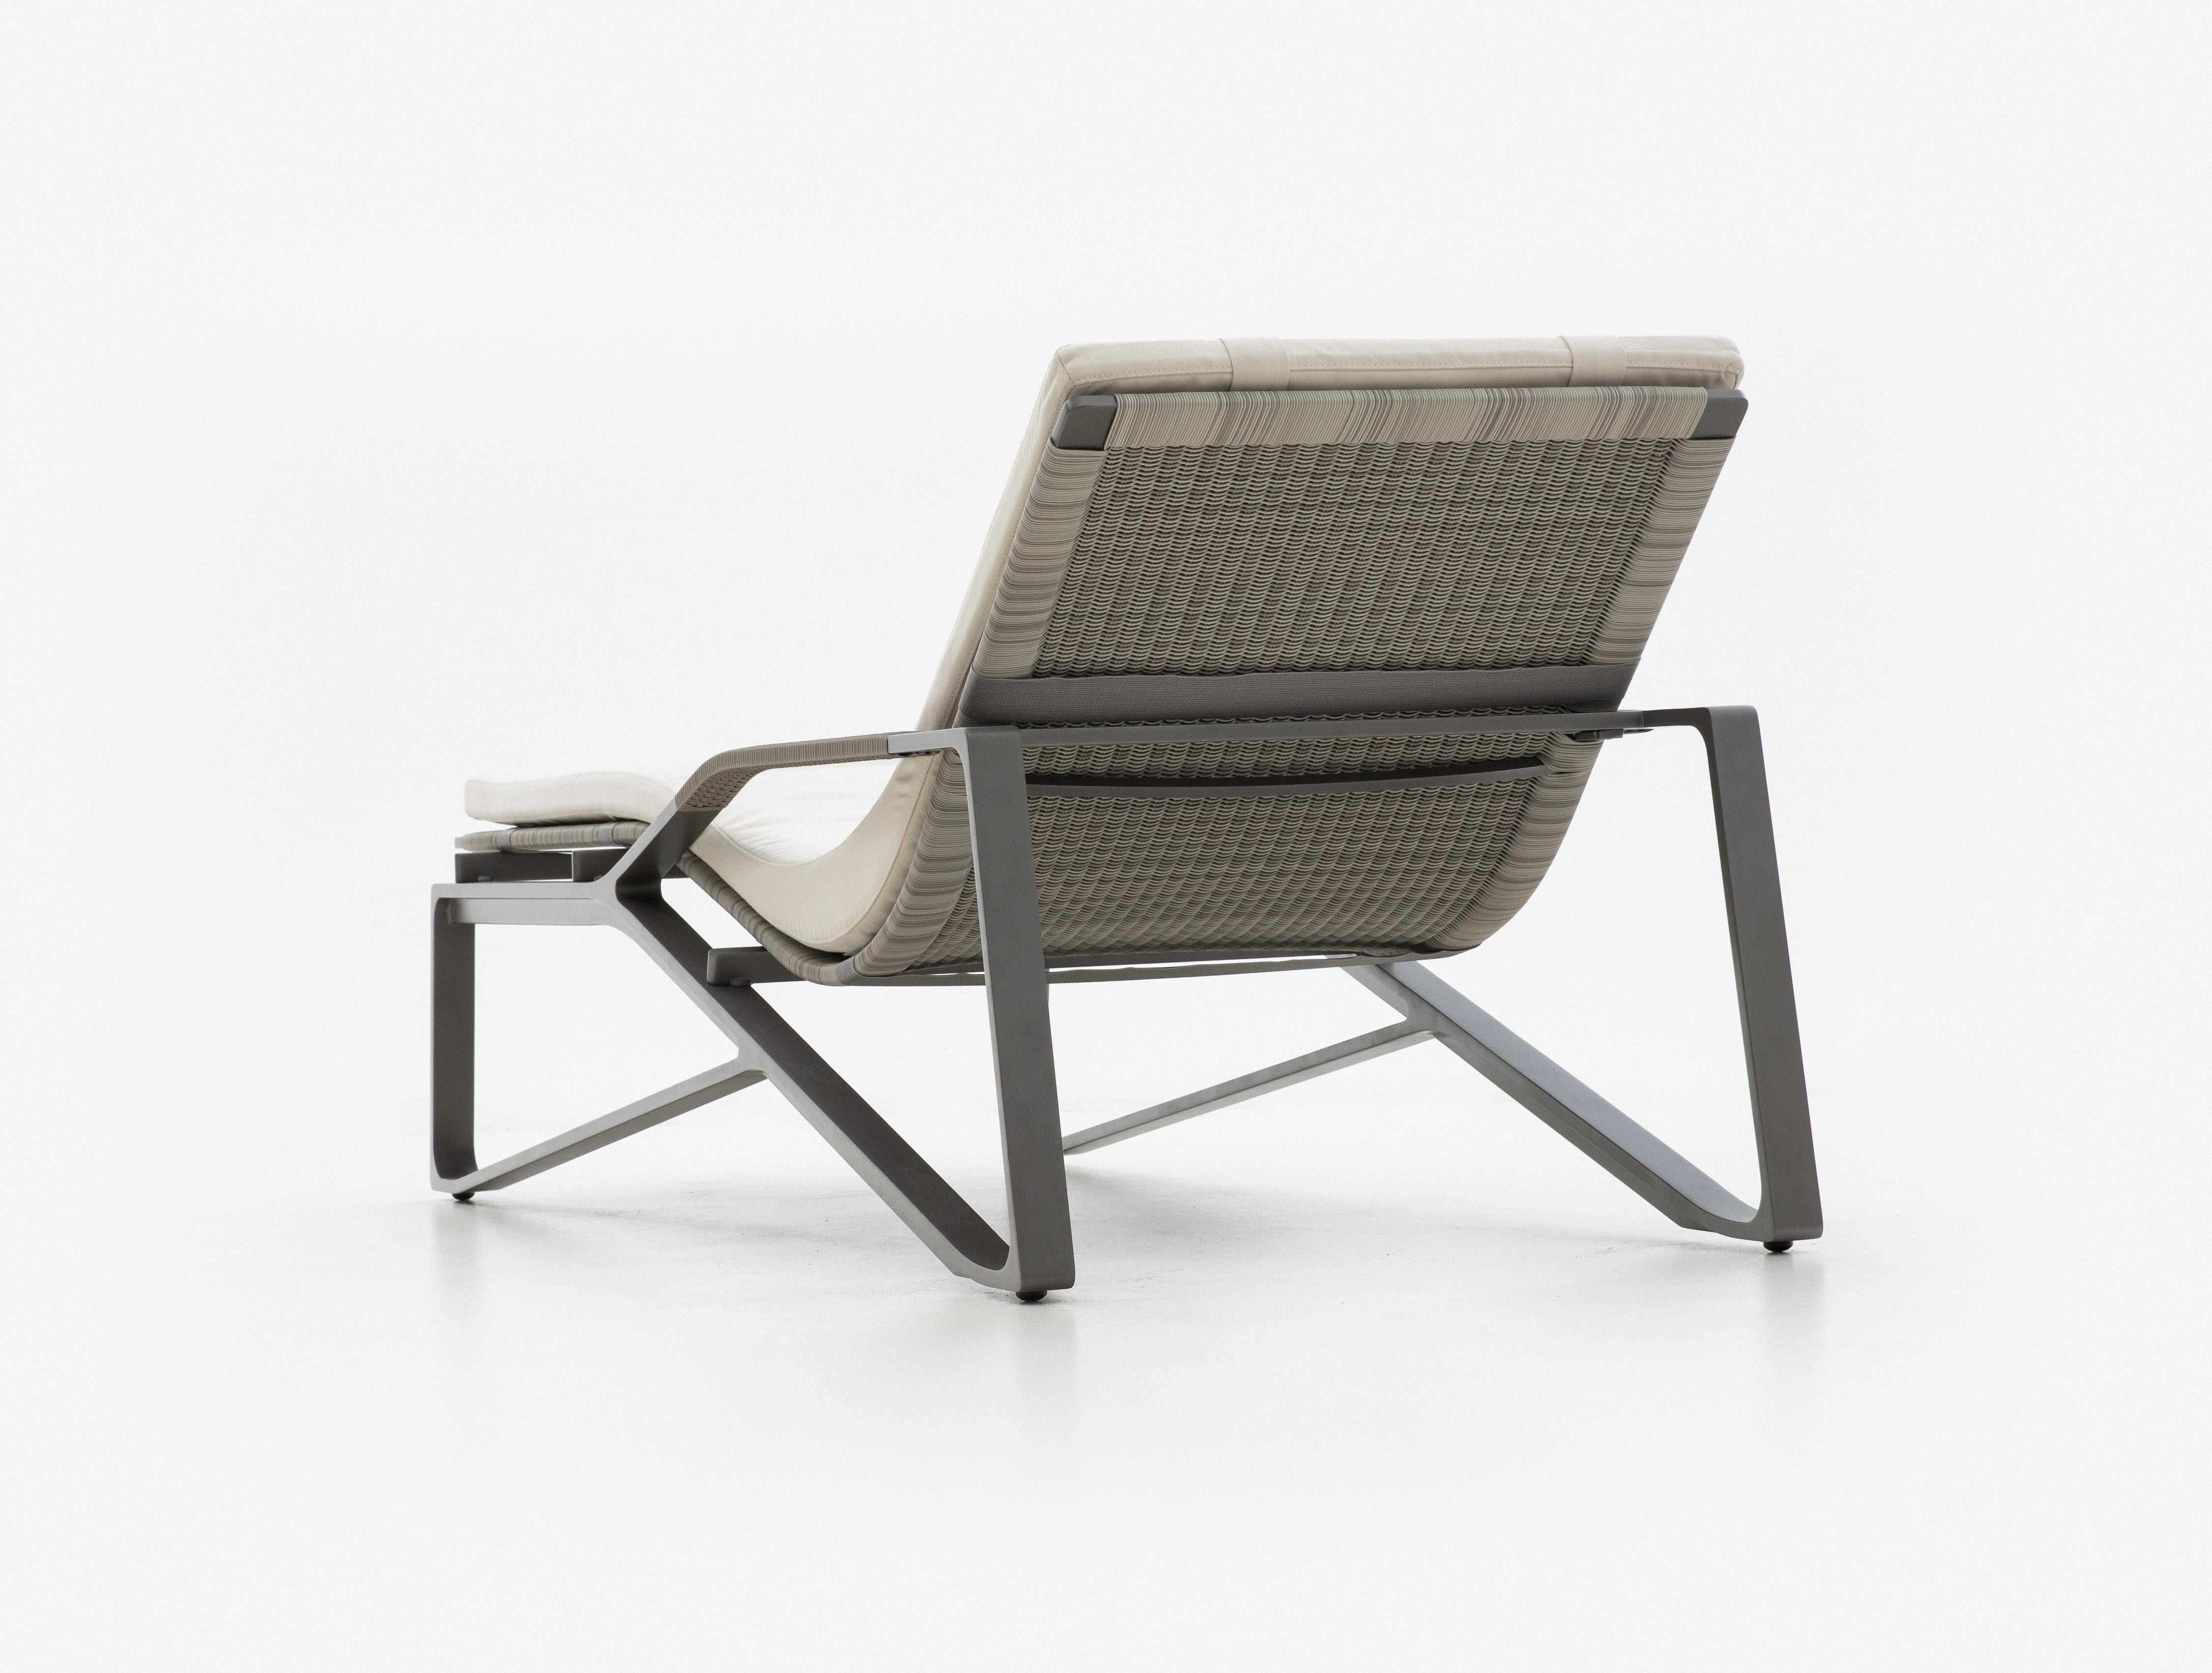 Modern HOLLY HUNT Outdoor Moray Chaise with Oyster Base Finish and Sand Color Canvas